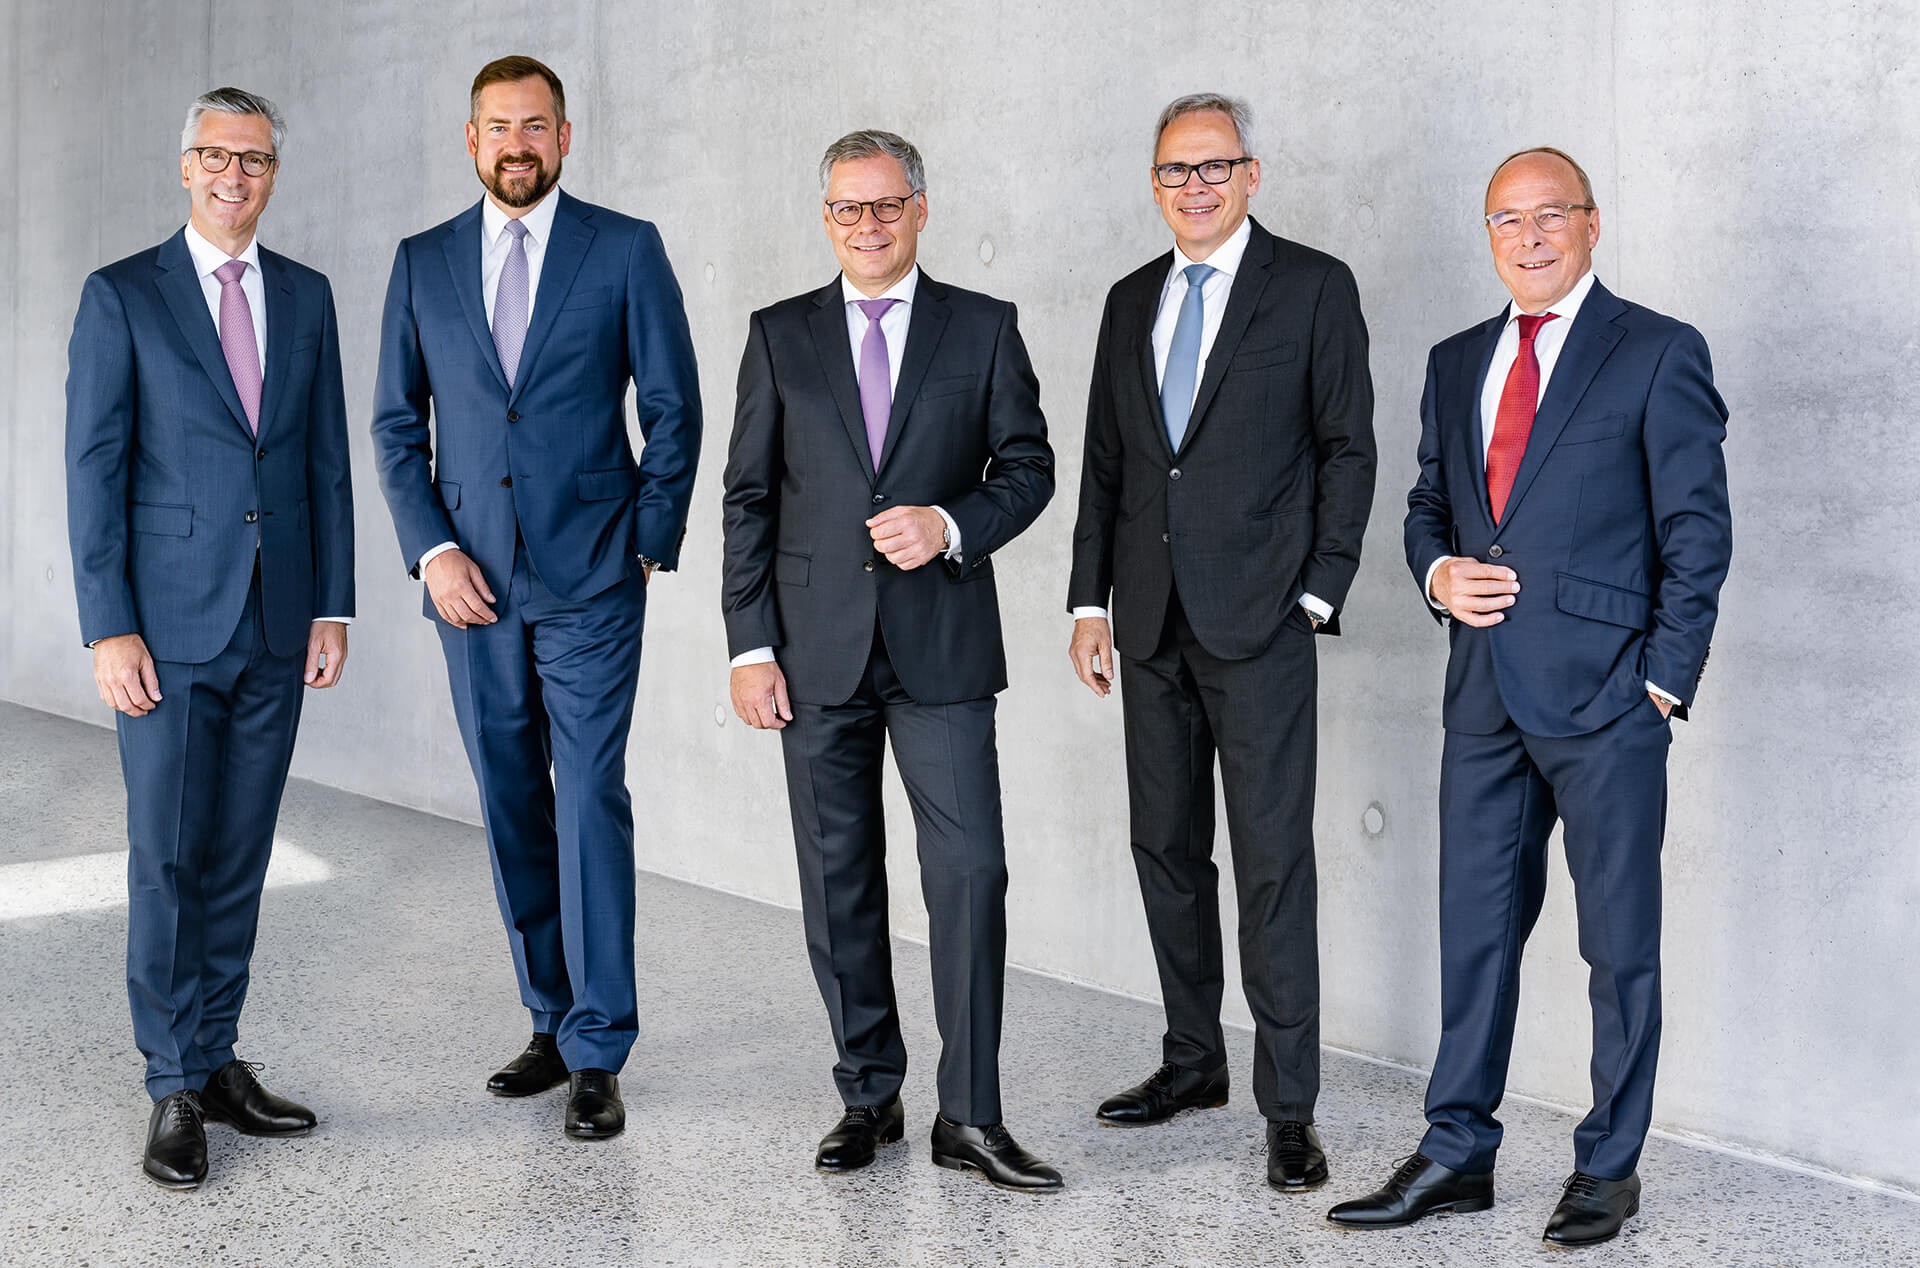 The Central Managing Board of the Würth Group